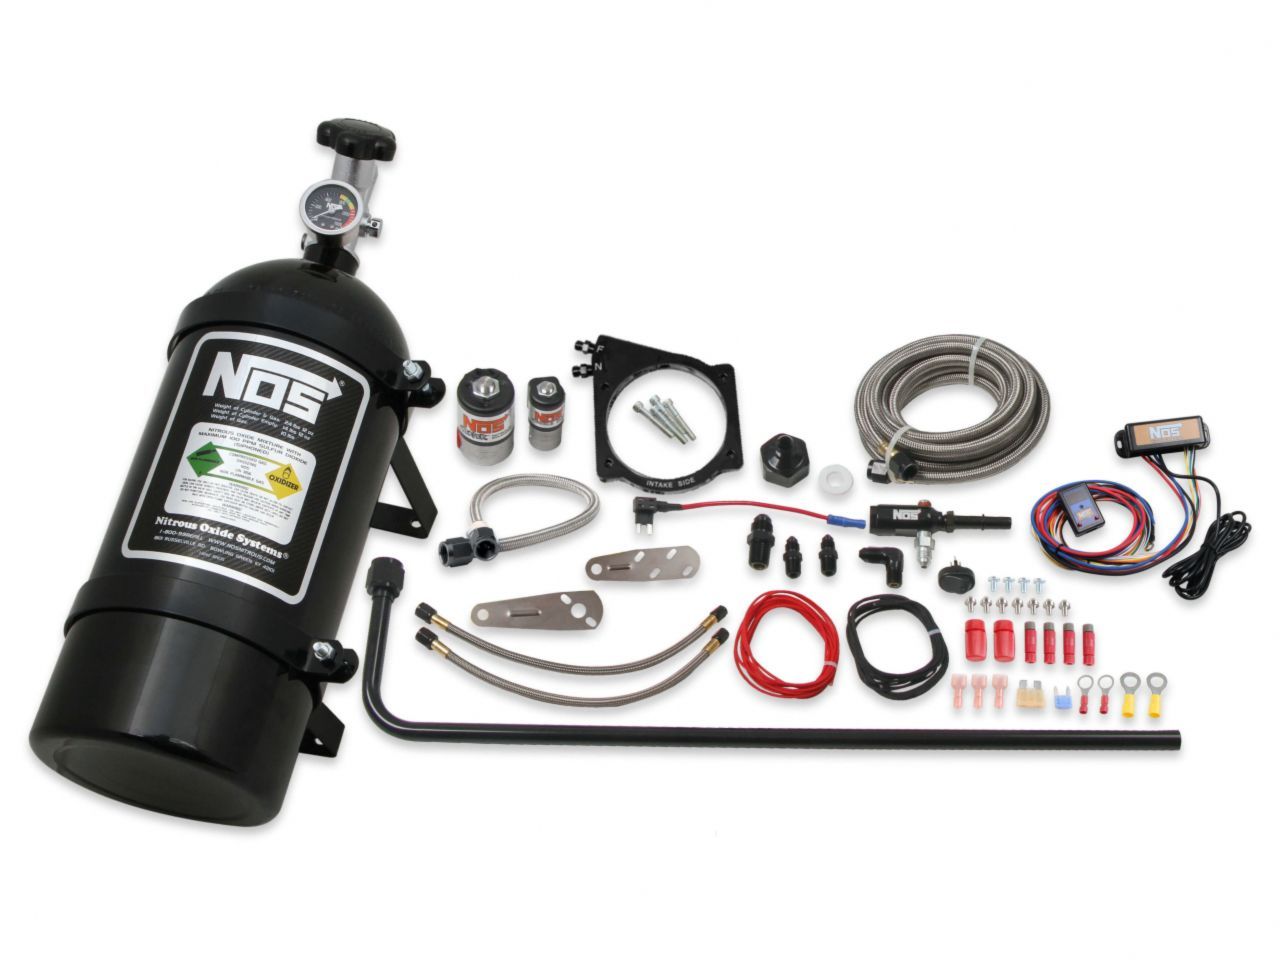 NOS Nitrous Oxide Kits and Accessories 05173BNOS Item Image